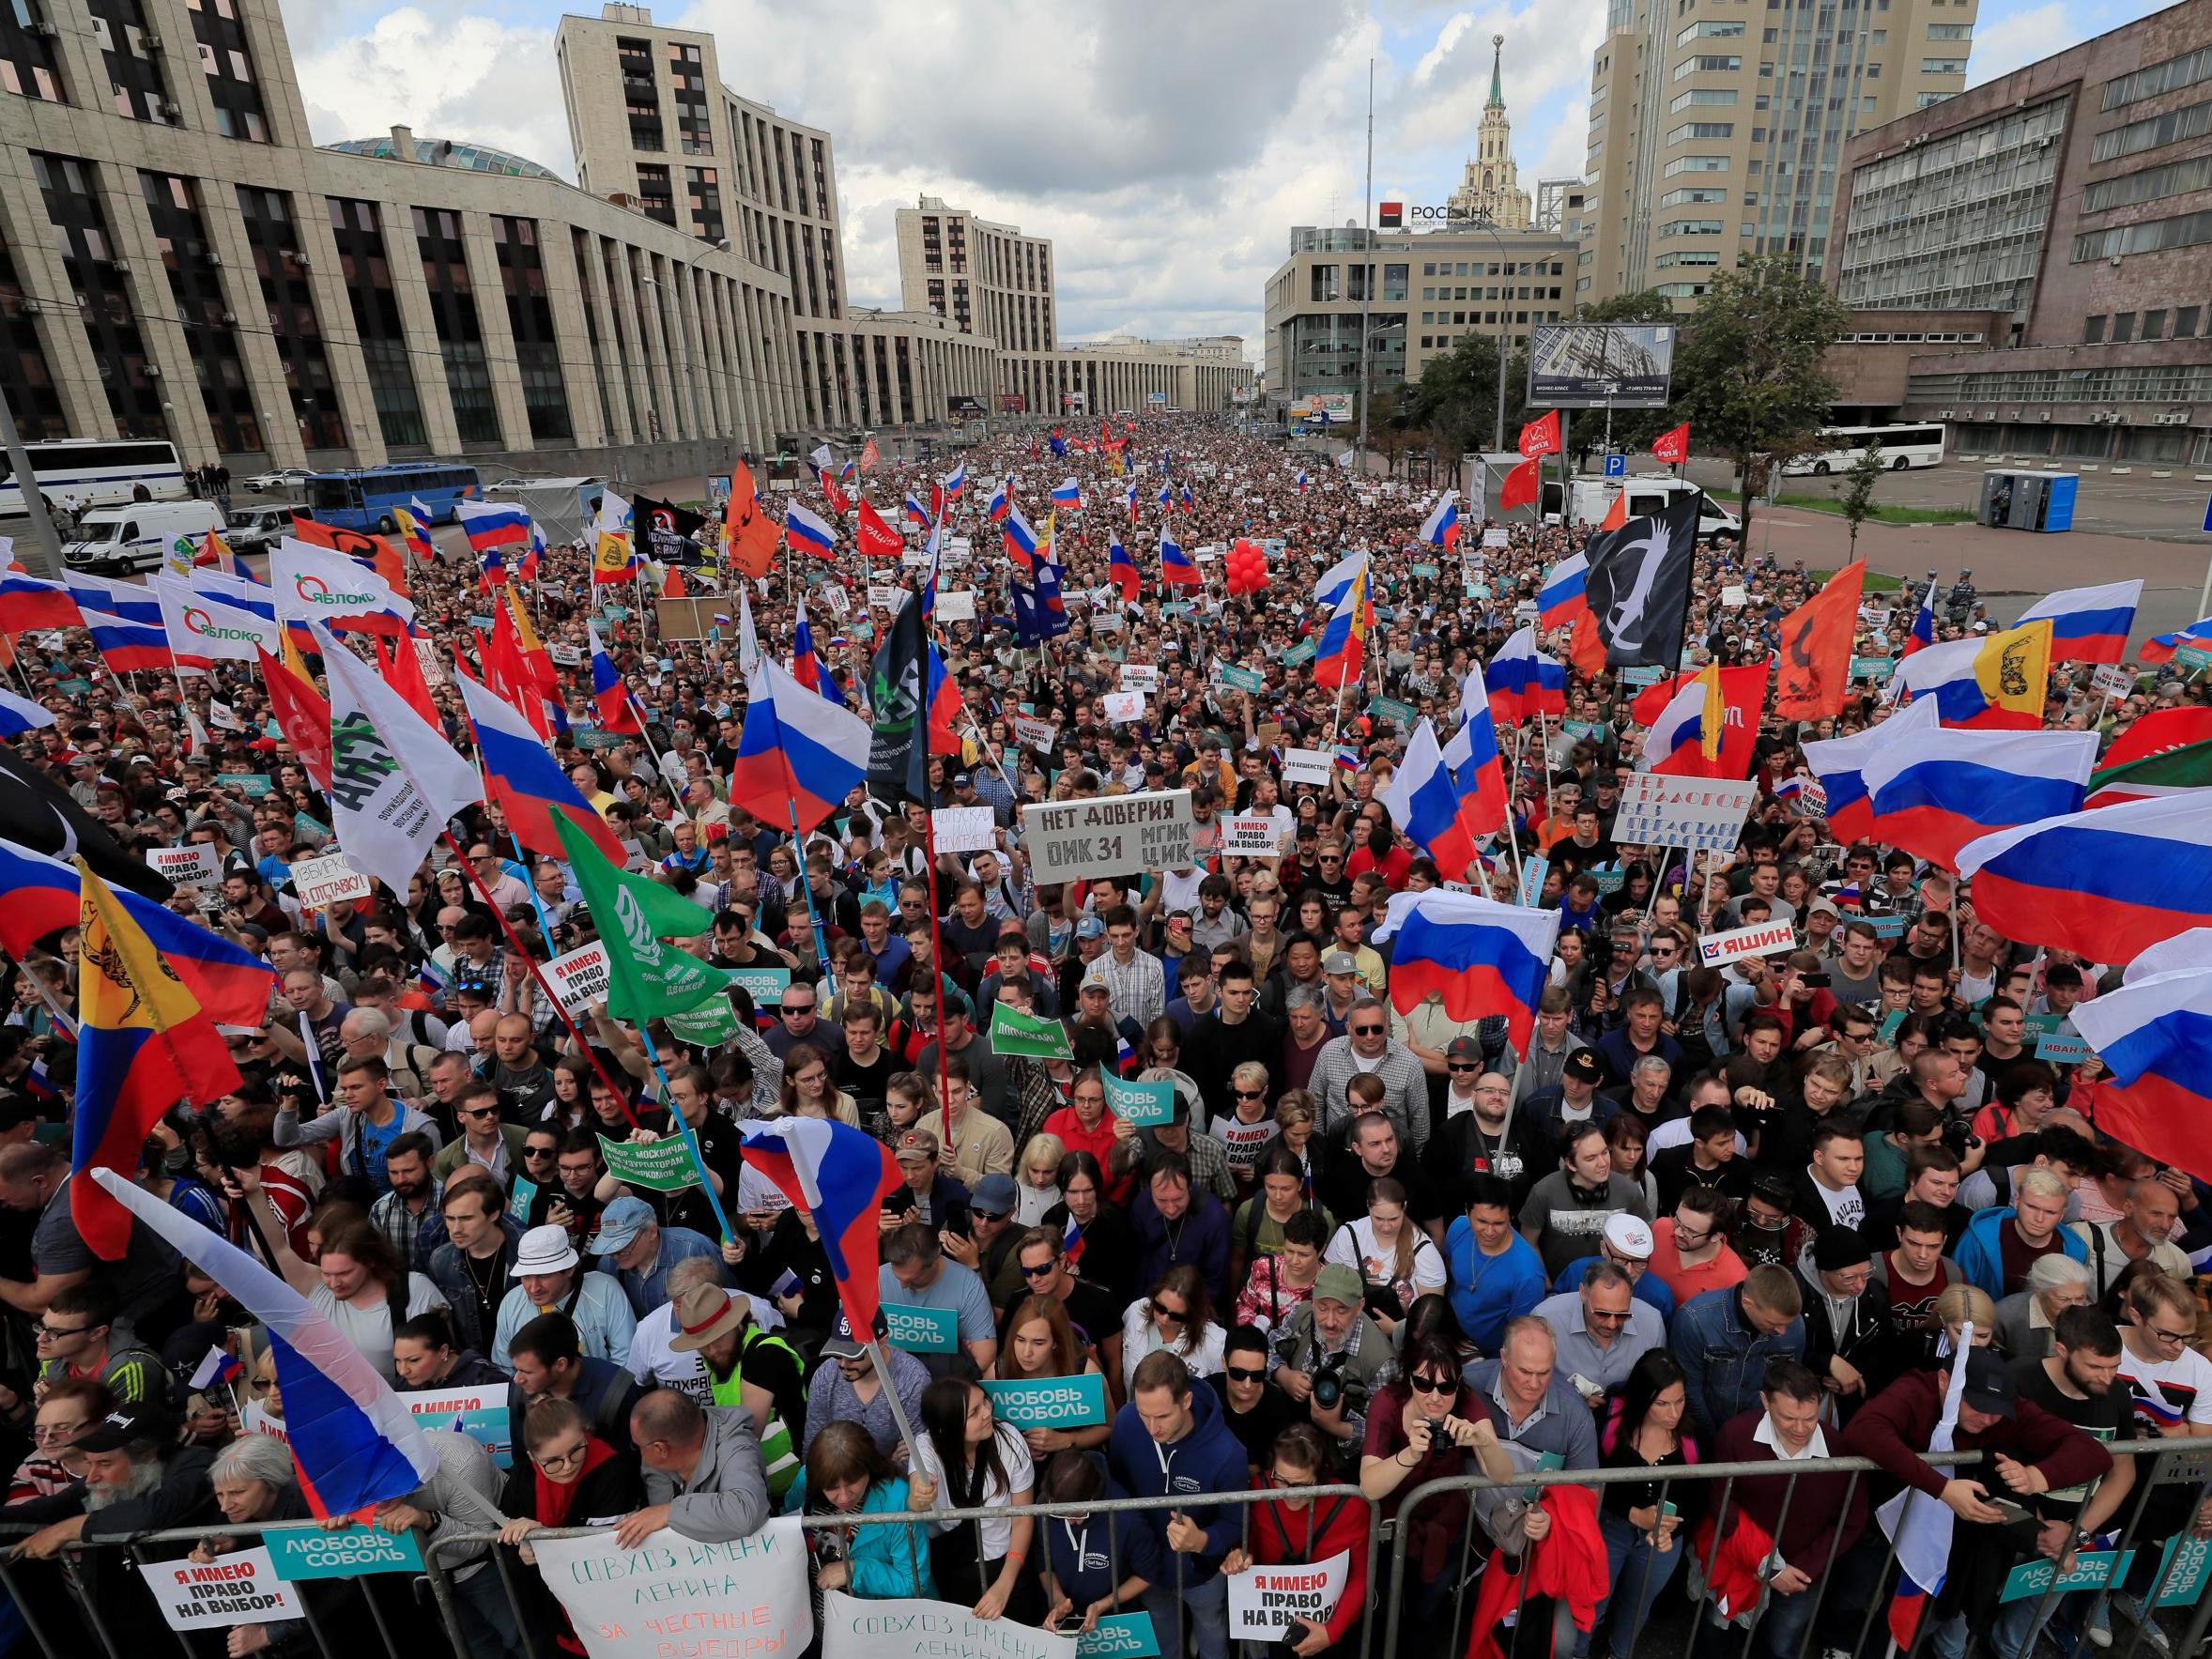 People take part in a rally in support of independent candidates for elections to Moscow's regional parliament, in Moscow, Russia on 20 July 2019.